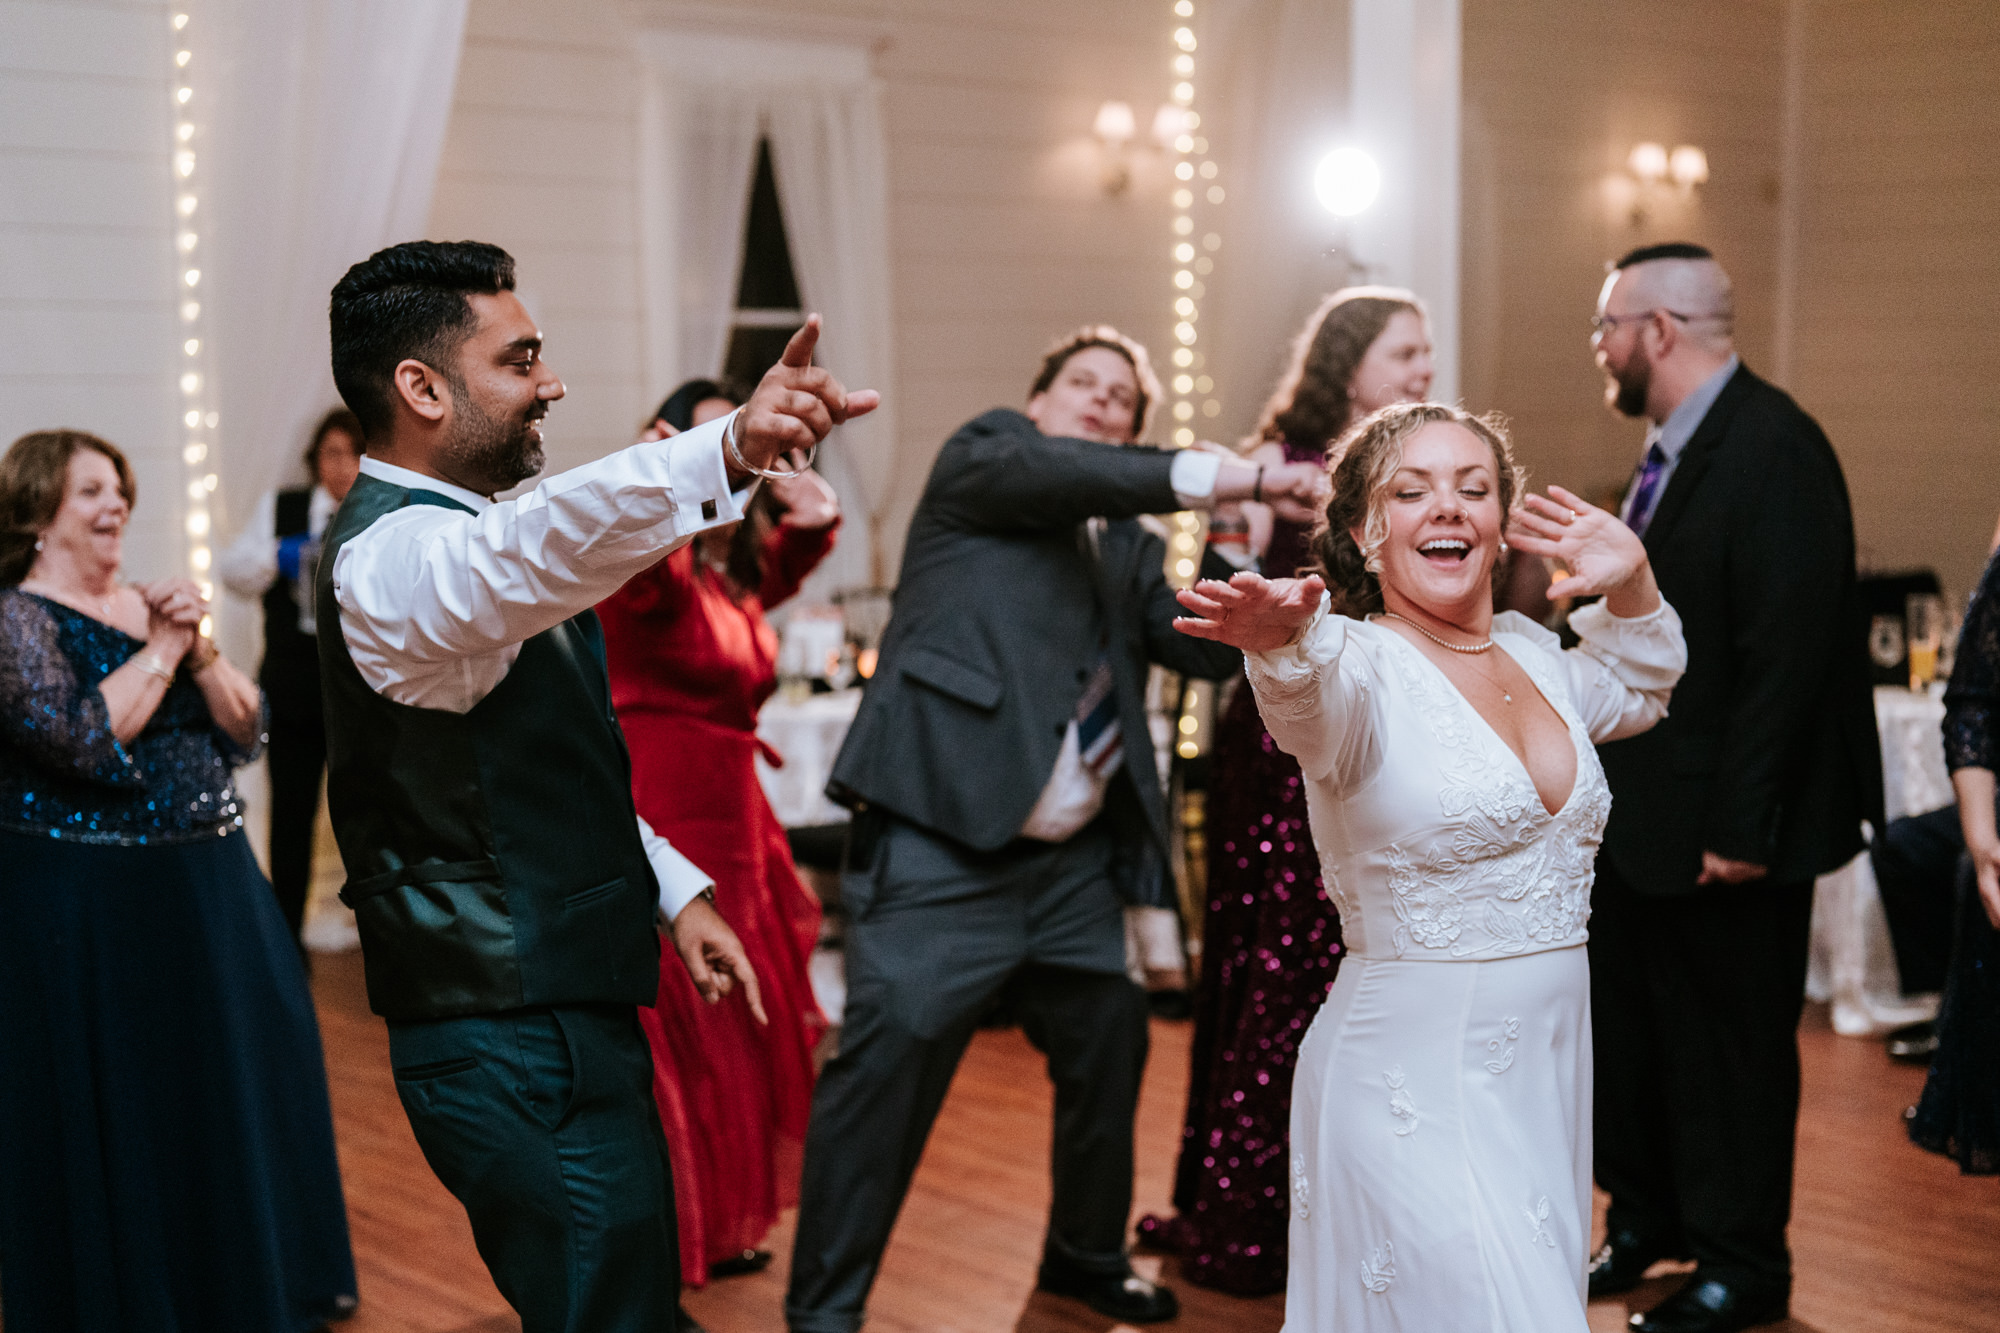 bride and groom having fun on the dance floor together